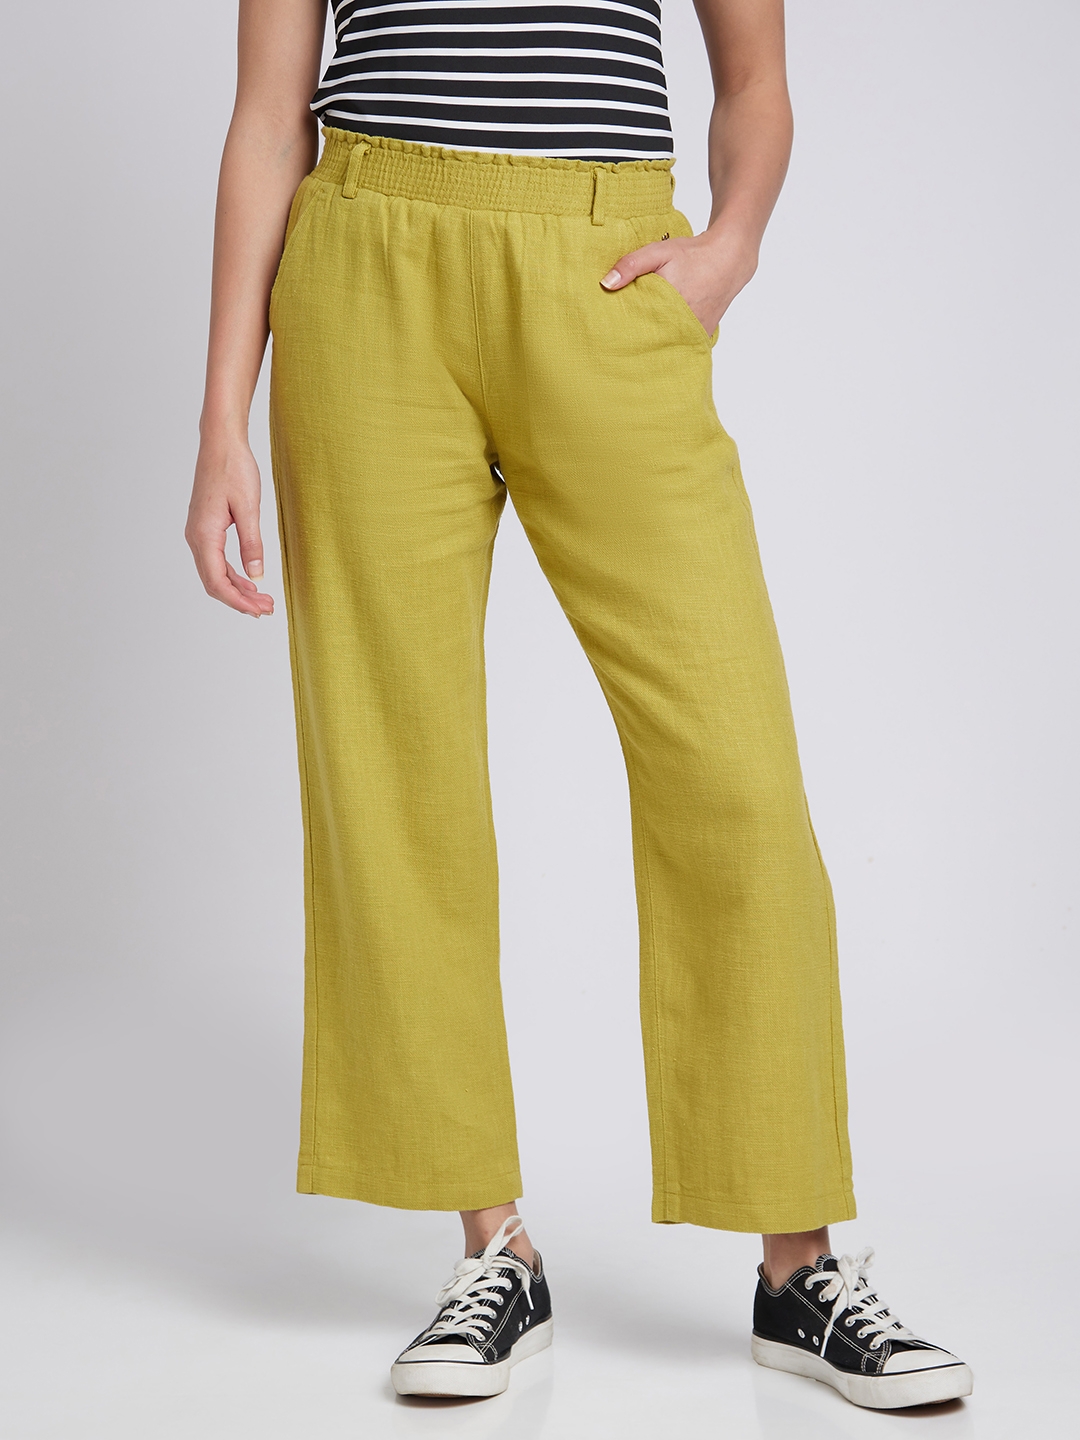 Women's Yellow Linen Solid Trousers